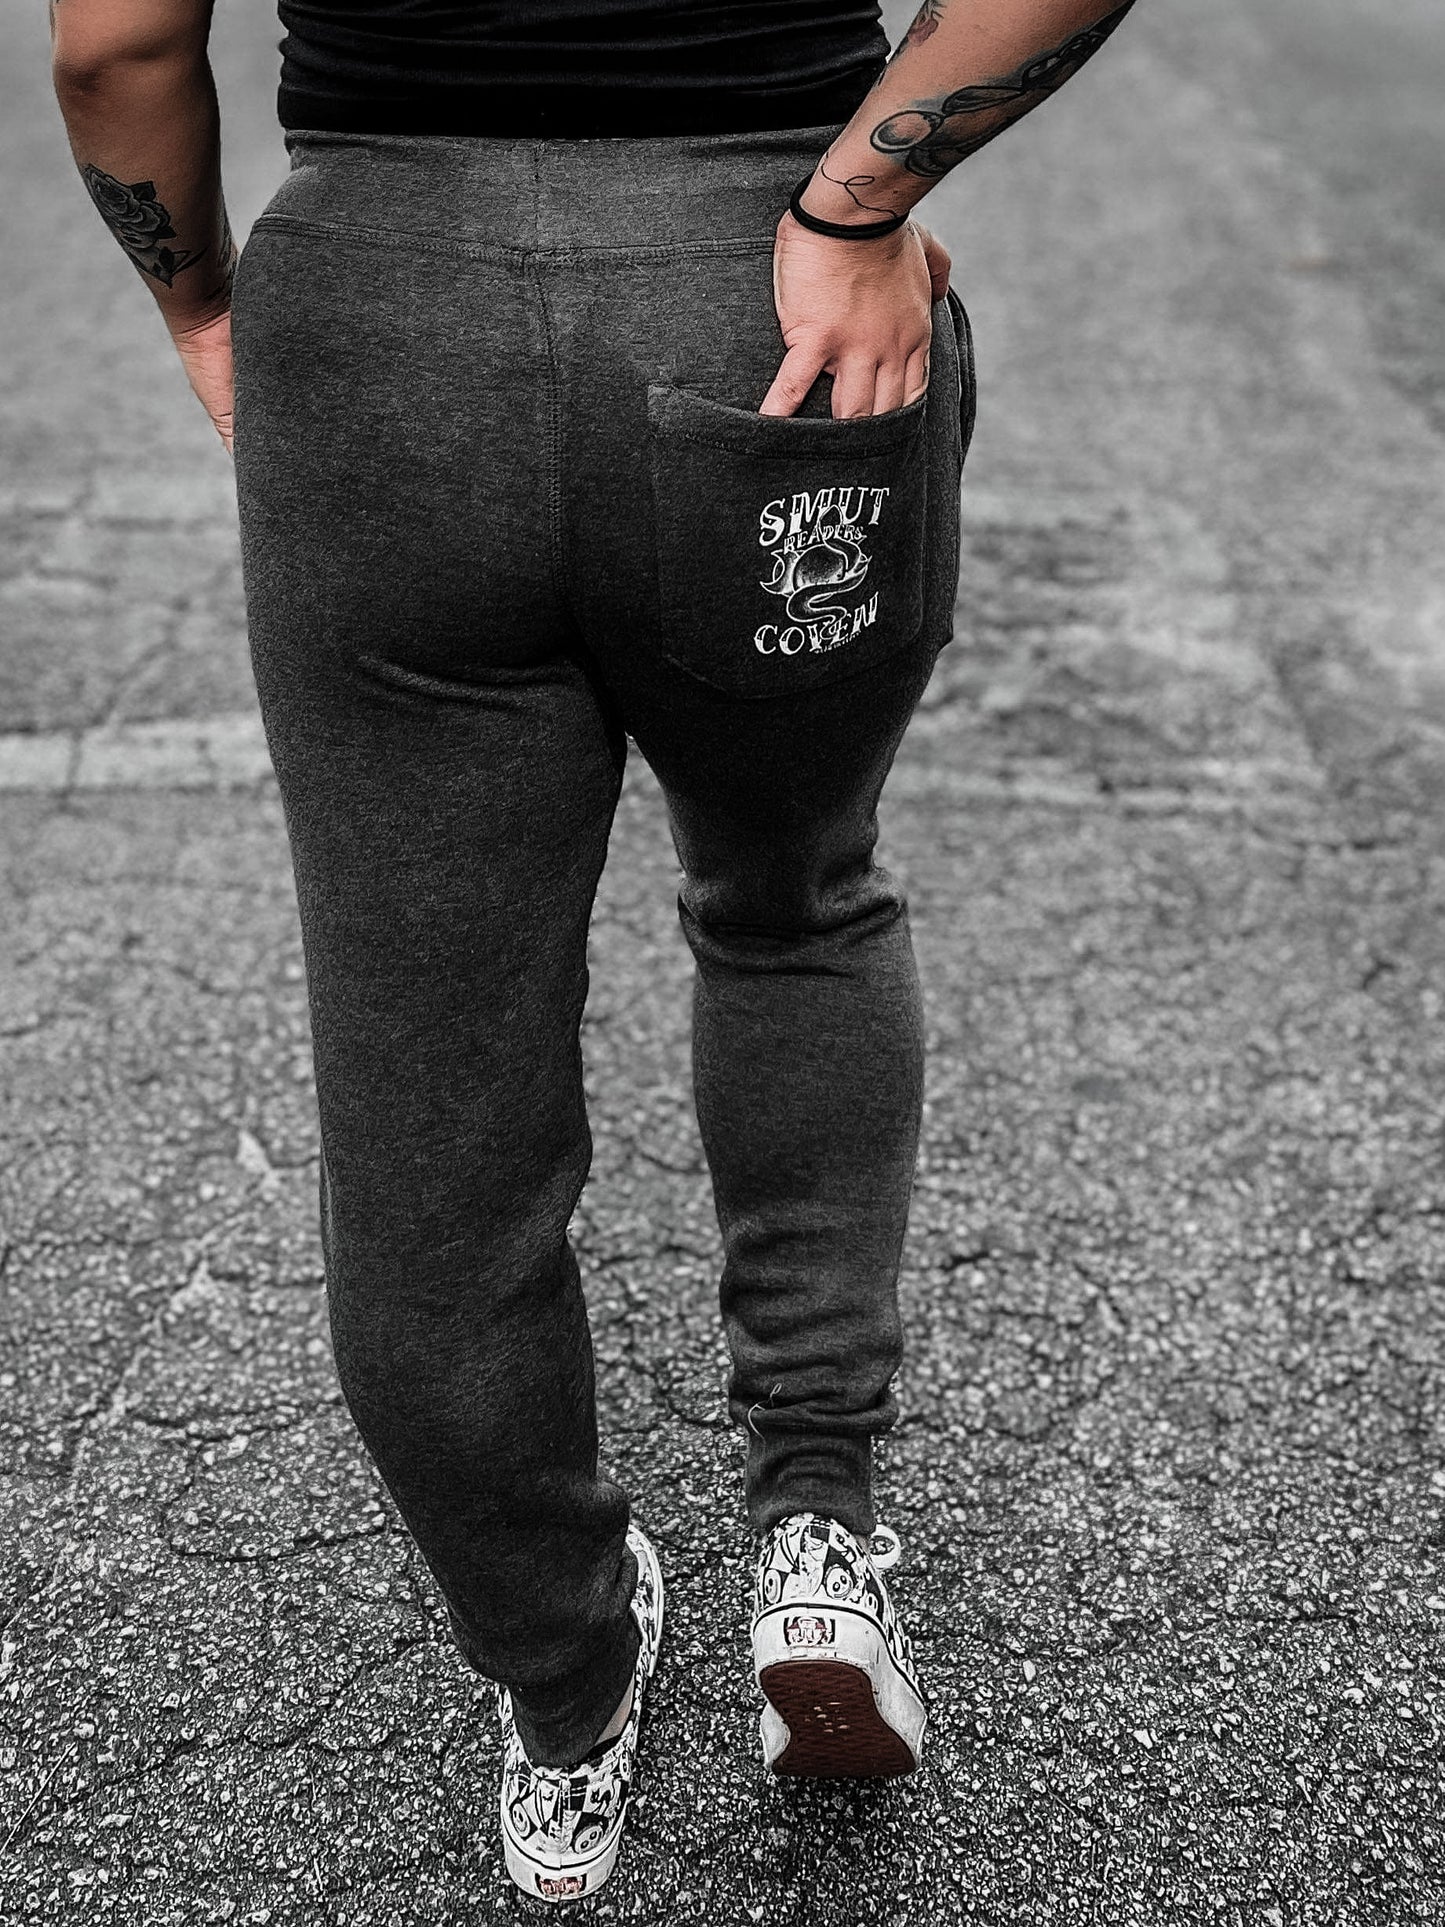 Smut Coven Joggers